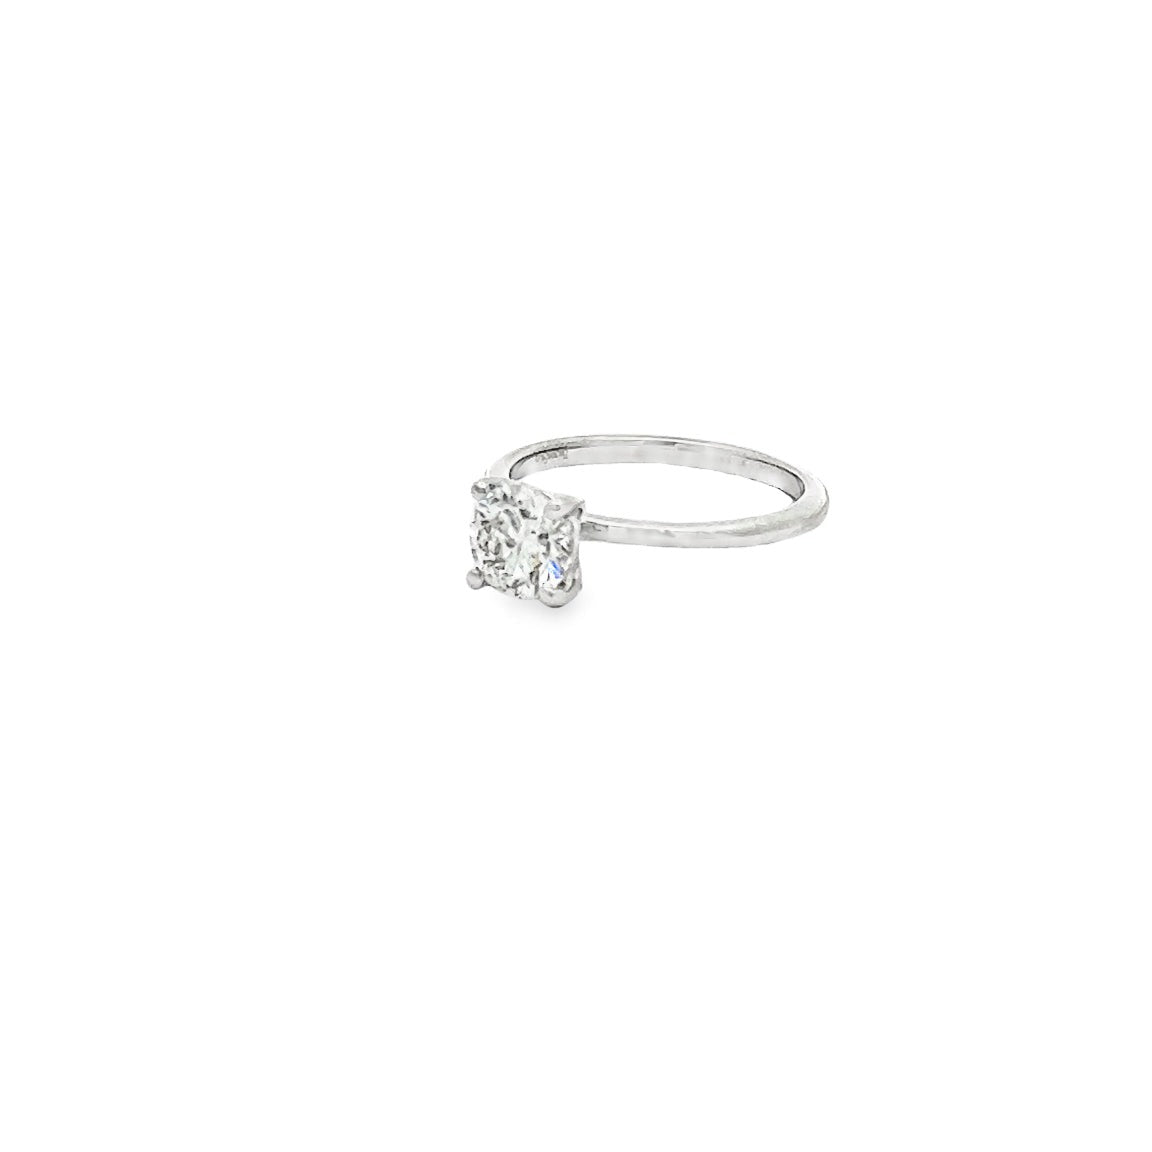 The 1974 18K White Gold Round Solitaire Engagement Ring